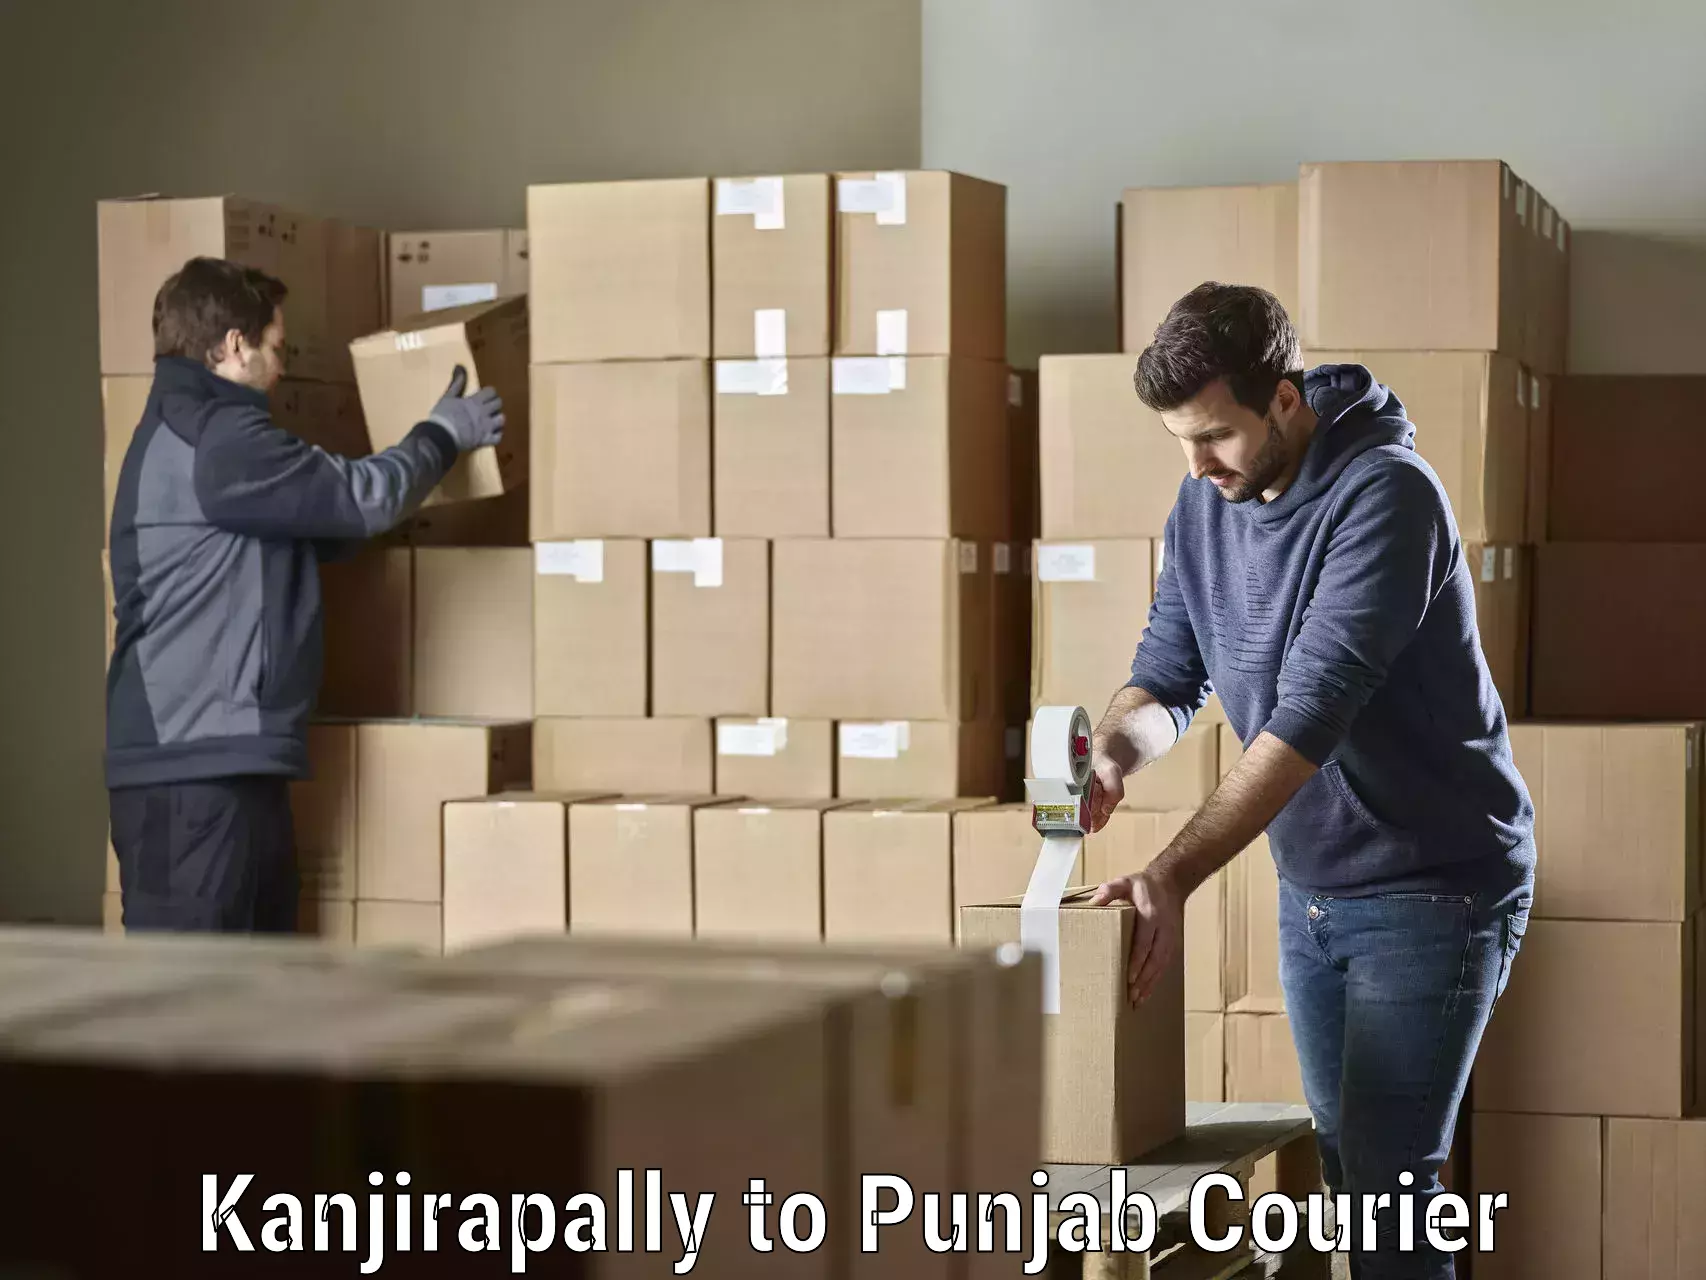 Flexible delivery schedules in Kanjirapally to Anandpur Sahib